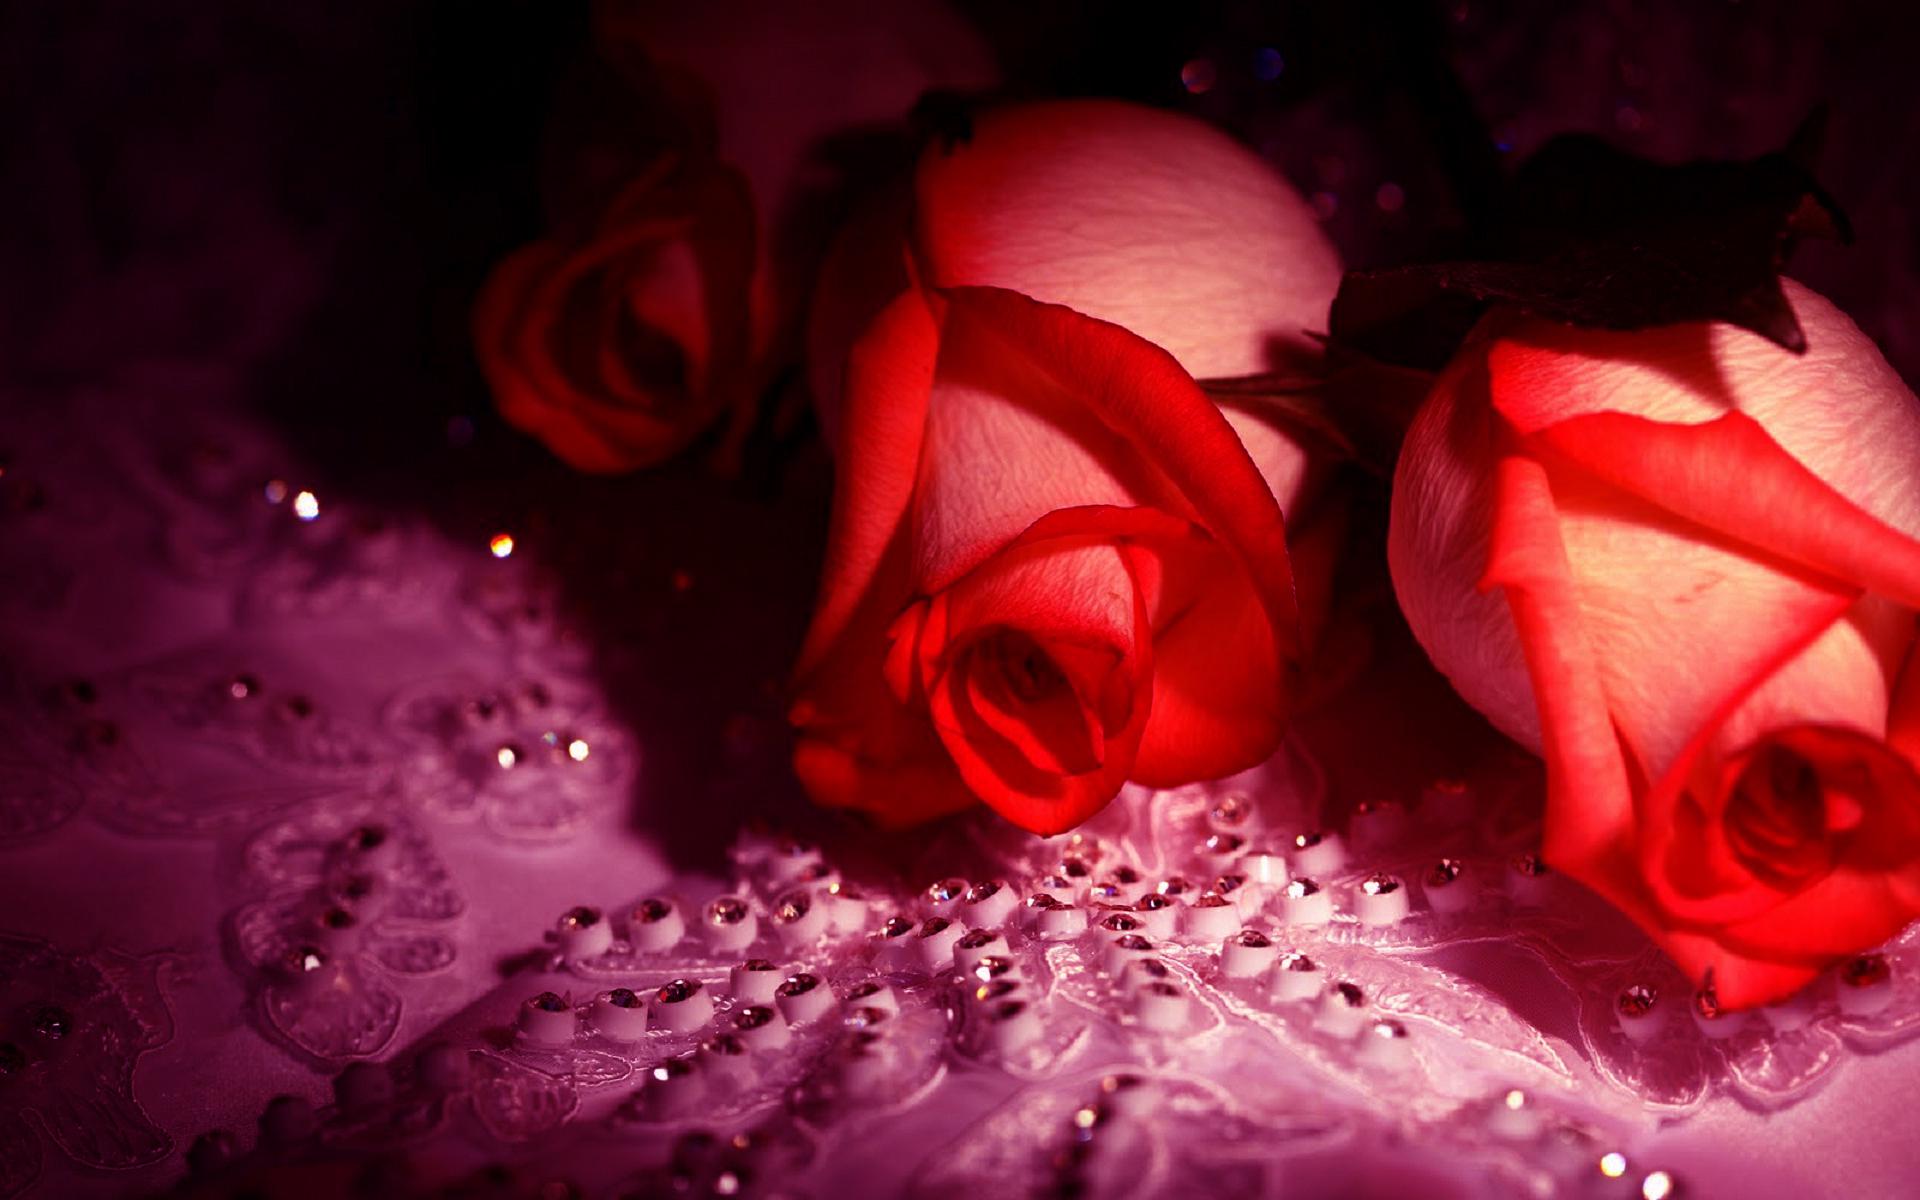 Red Rose For Love HD Wallpaper New Wallpapernew